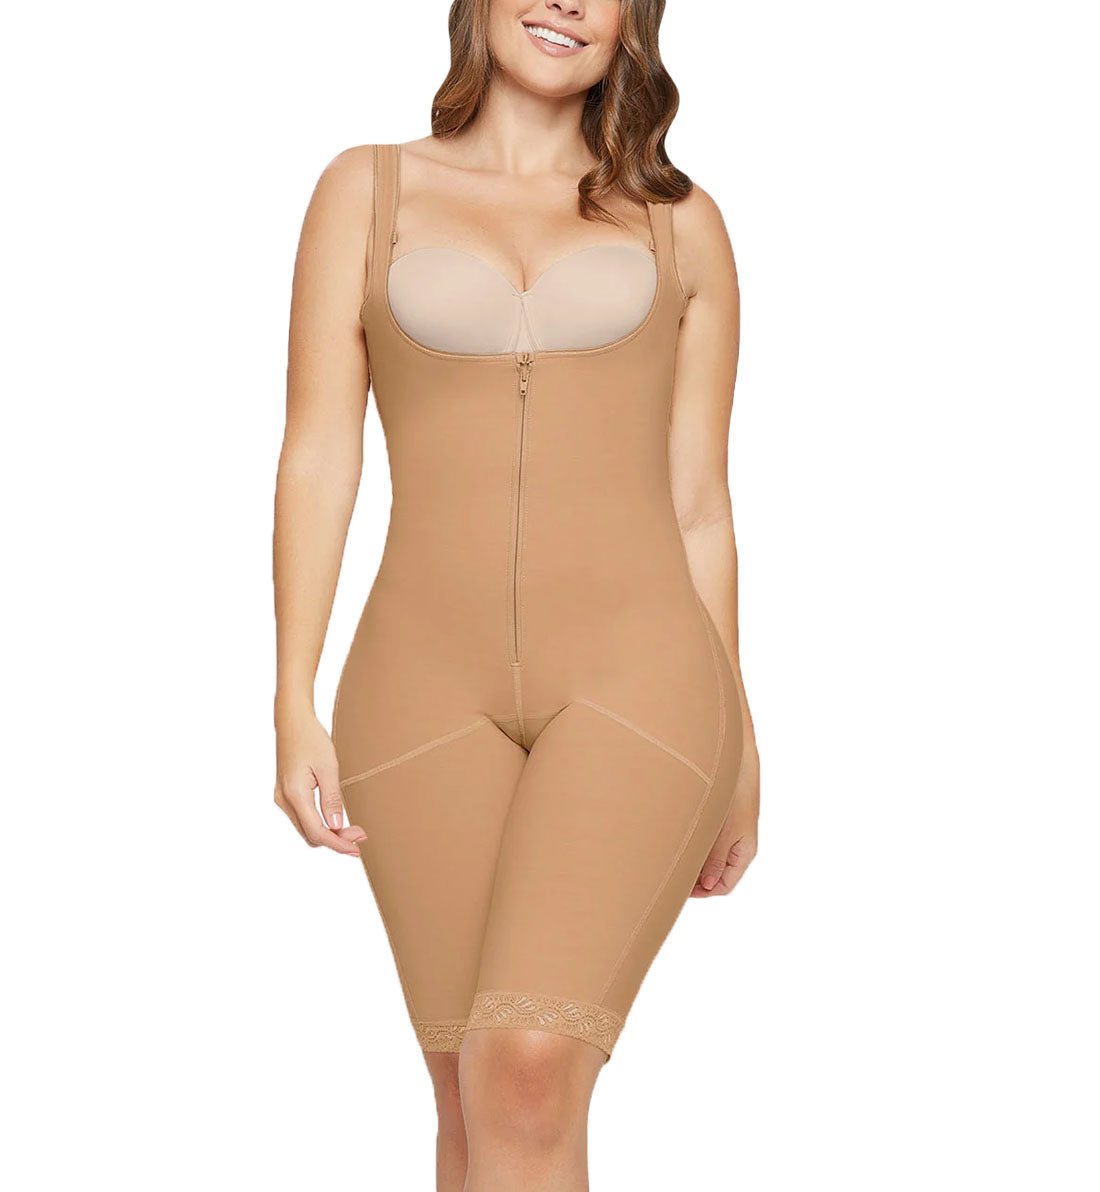 Leonisa Sculpting Body and Thigh Shaper with Wide Straps (018688N),Small,Beige - Beige,Small